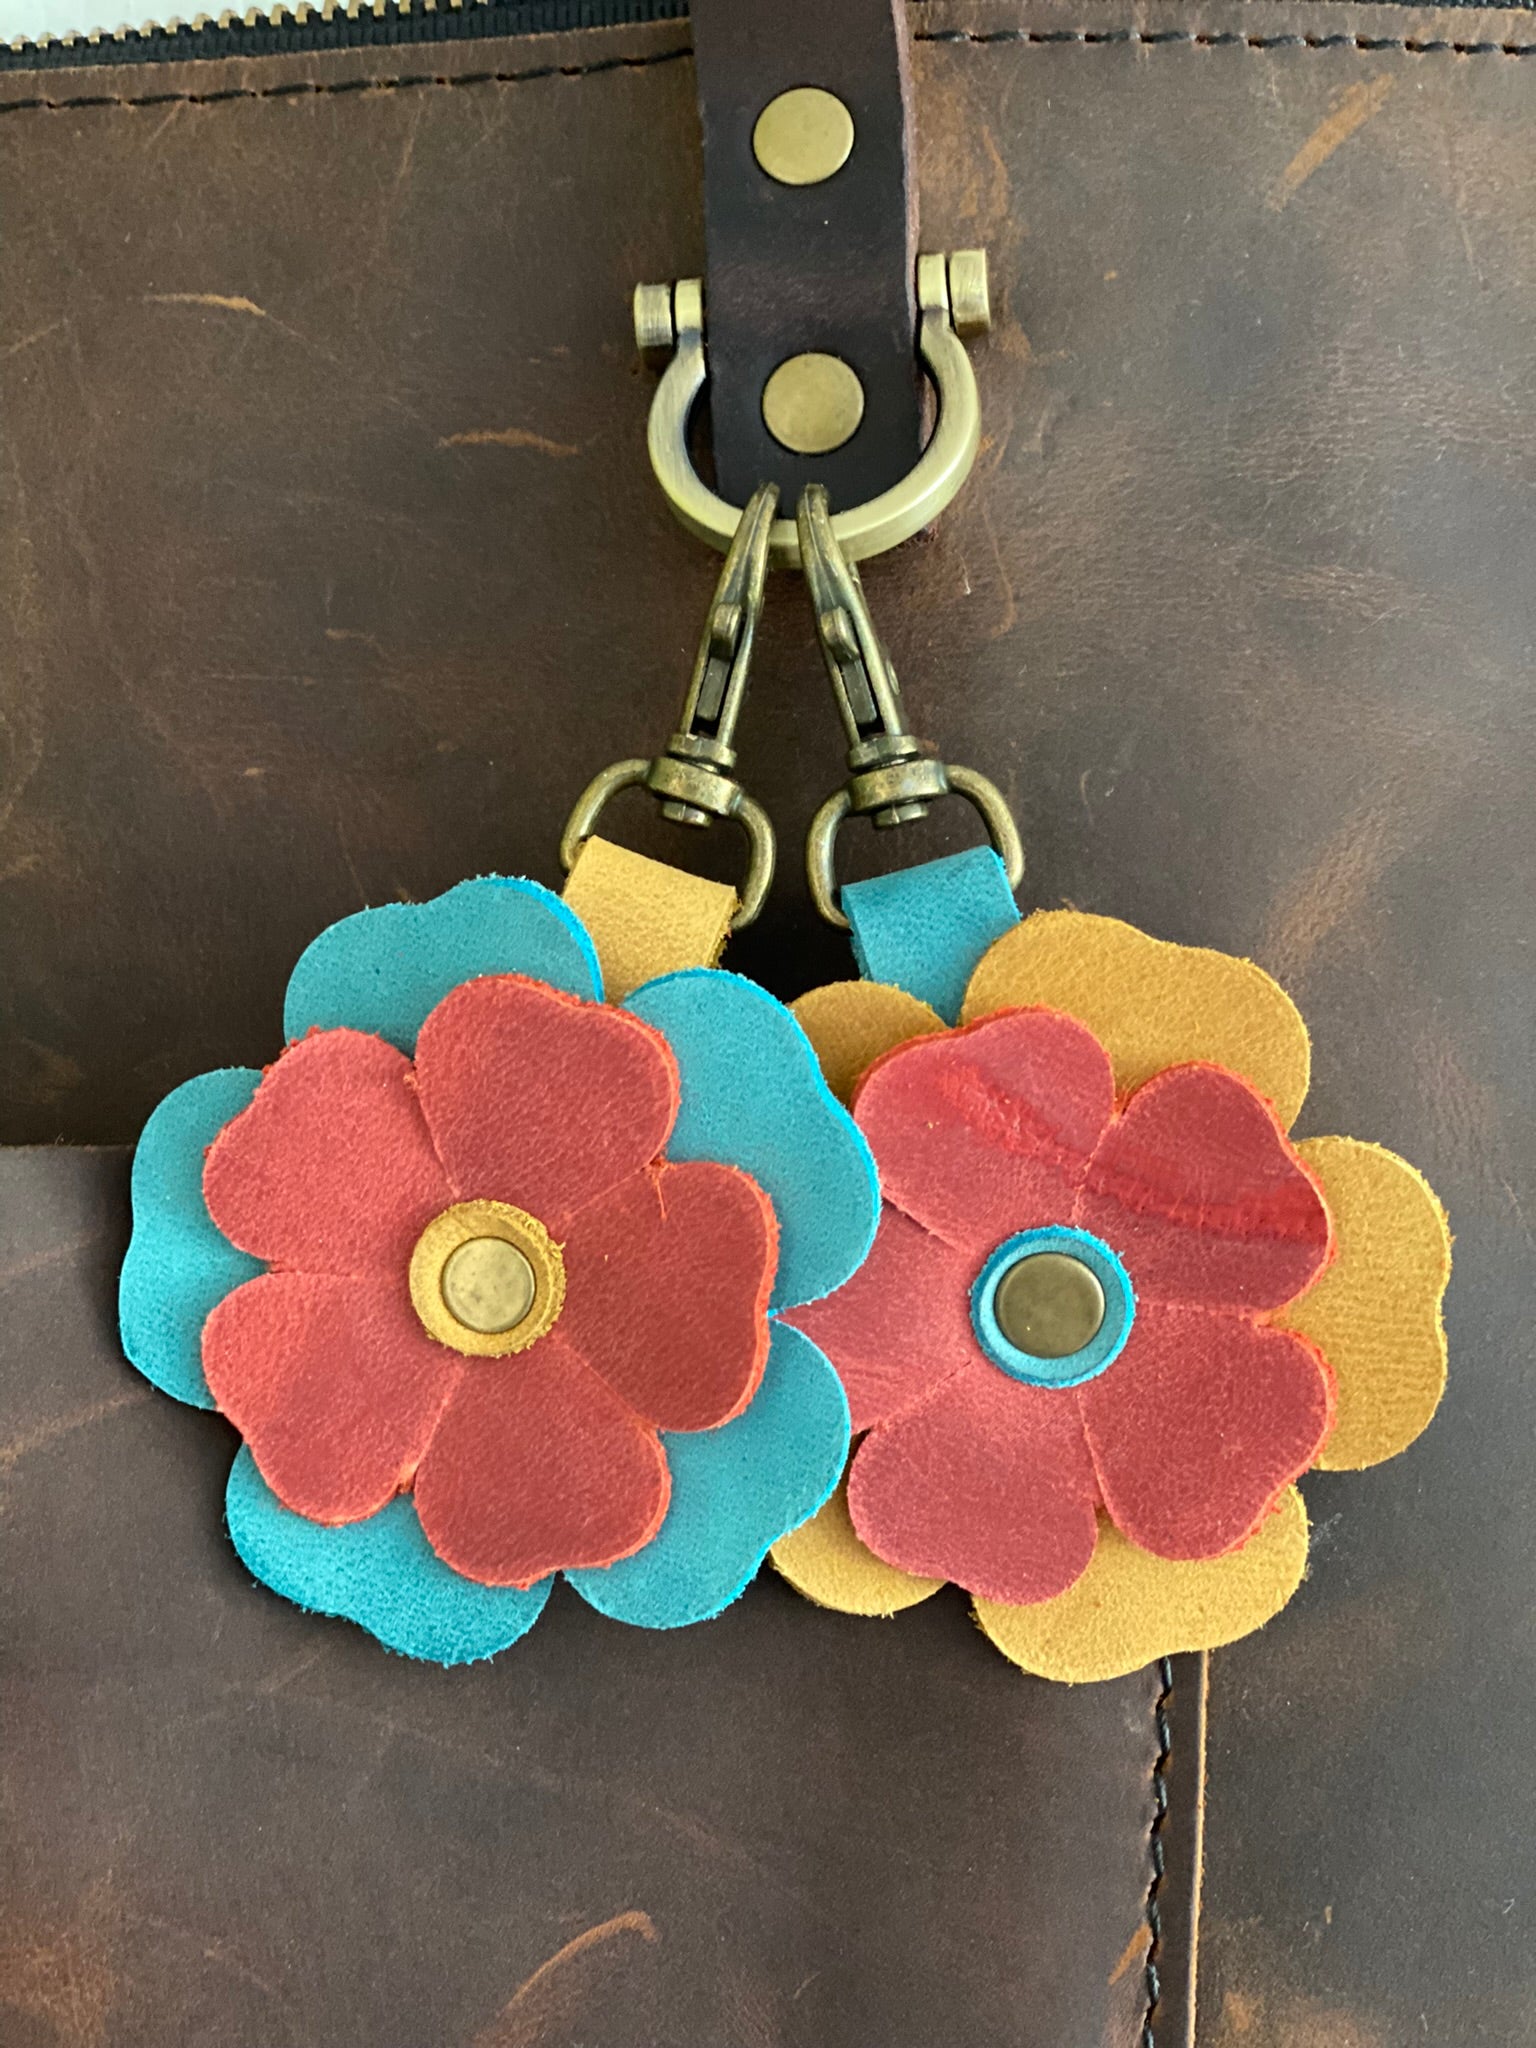 Clip on Leather Flower Bag Purse Charm with Swivel Lobster Clasp